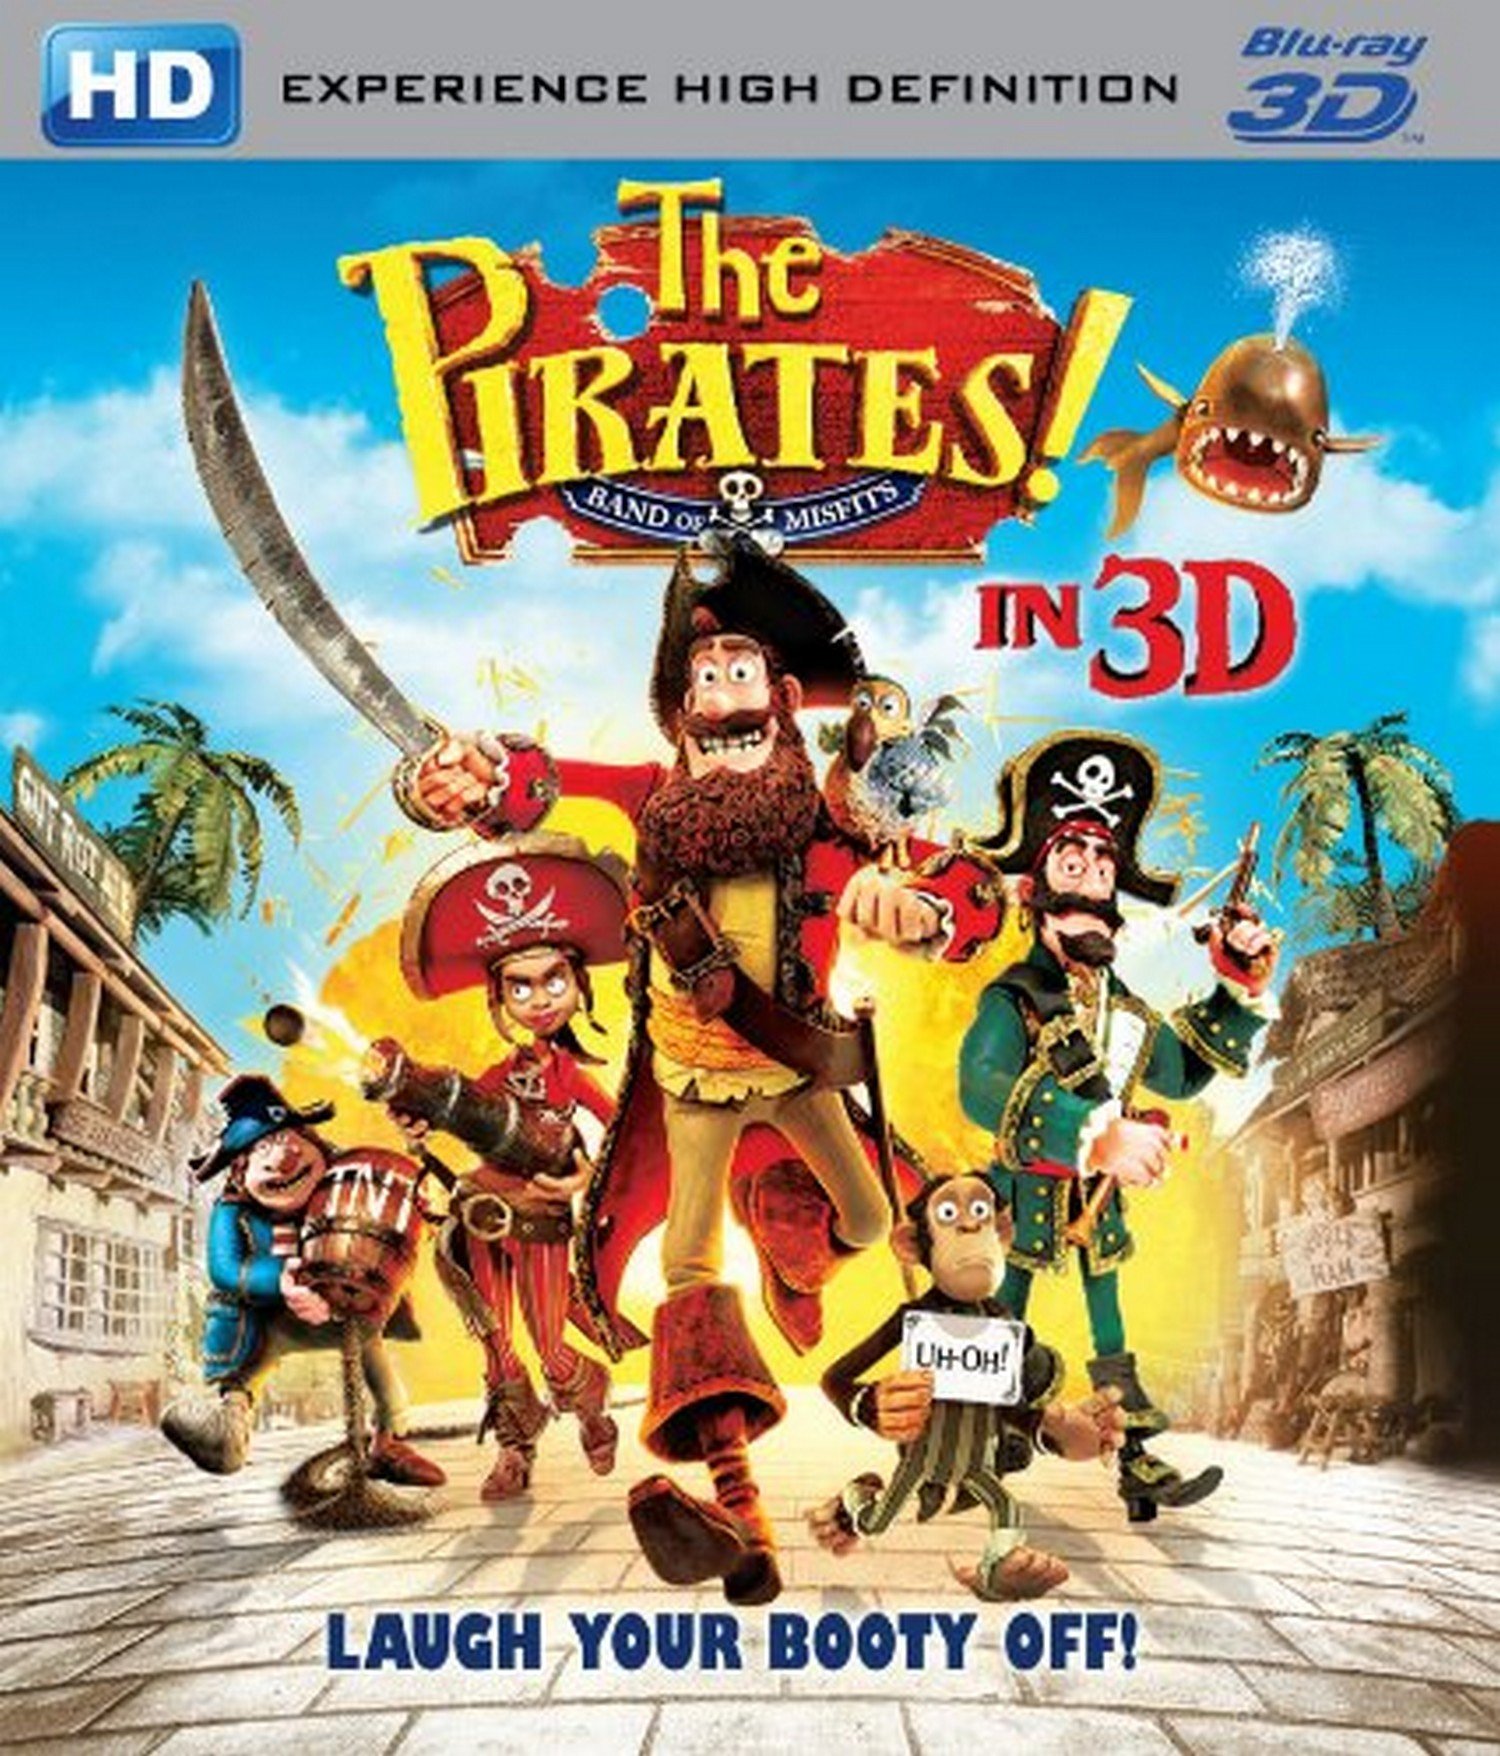 the-pirates-band-of-misfits-3d-movie-purchase-or-watch-online